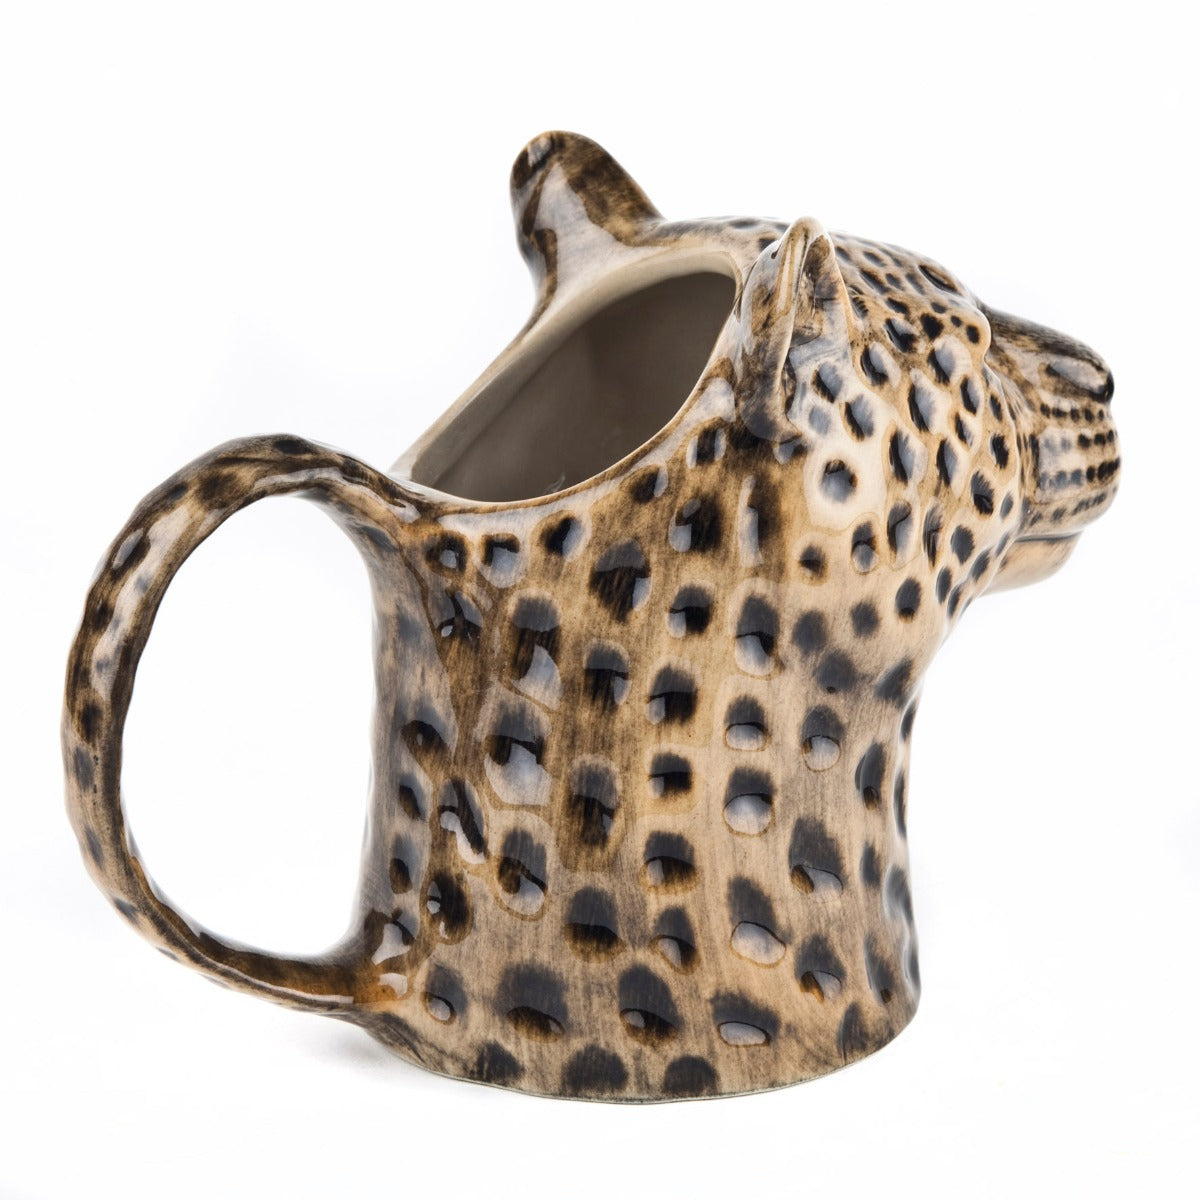 Leopard Jug- 3 sizes available